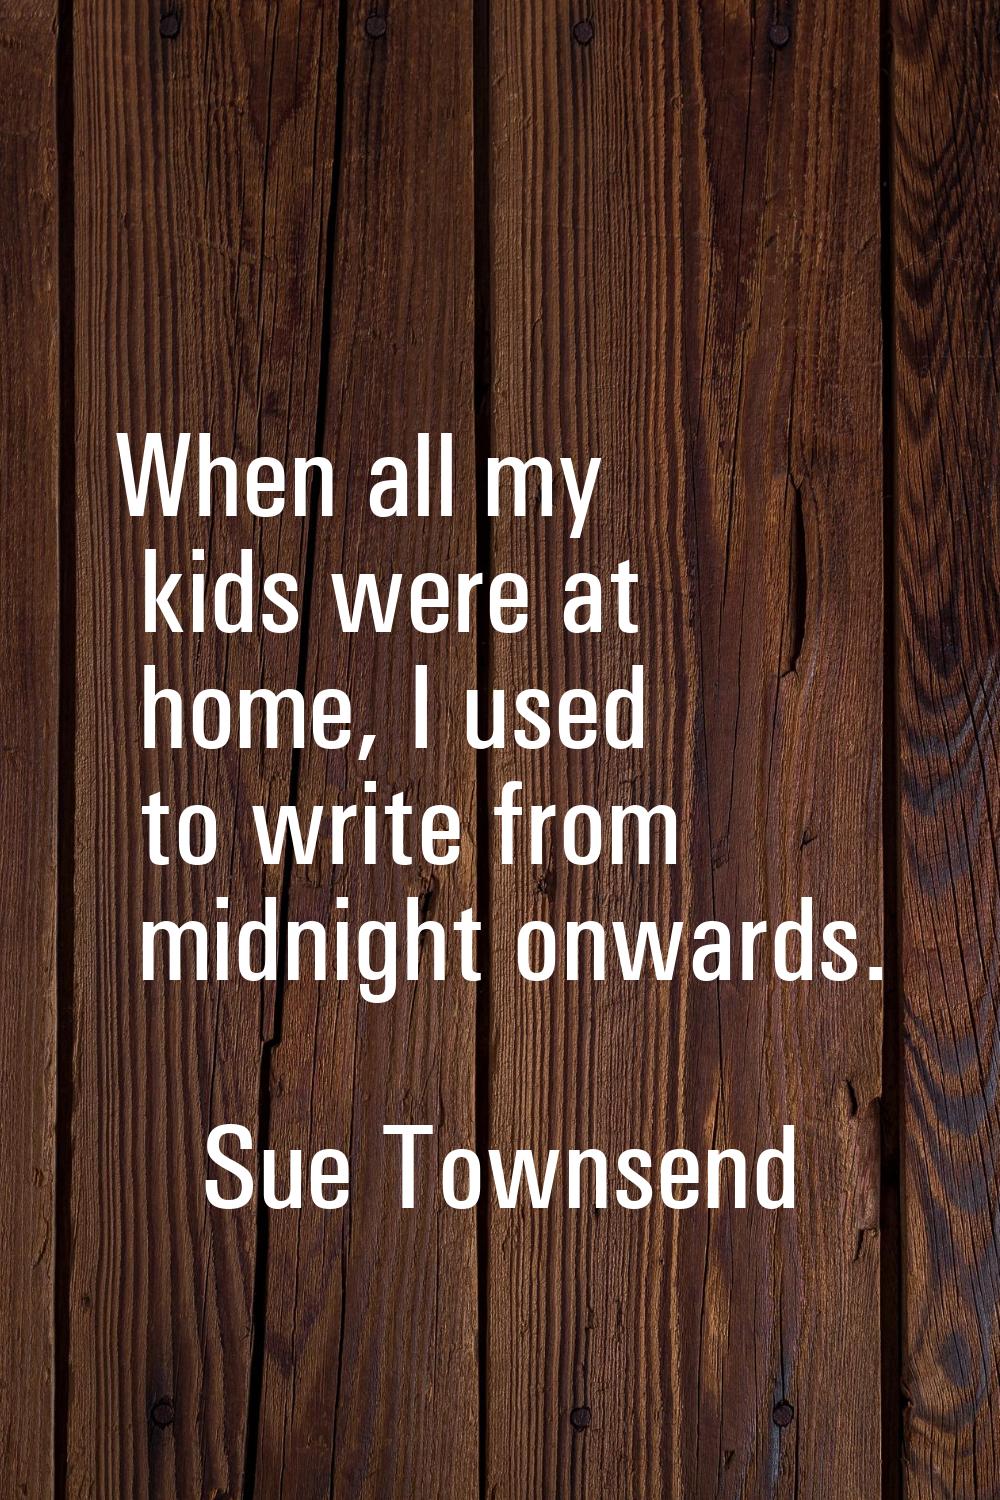 When all my kids were at home, I used to write from midnight onwards.